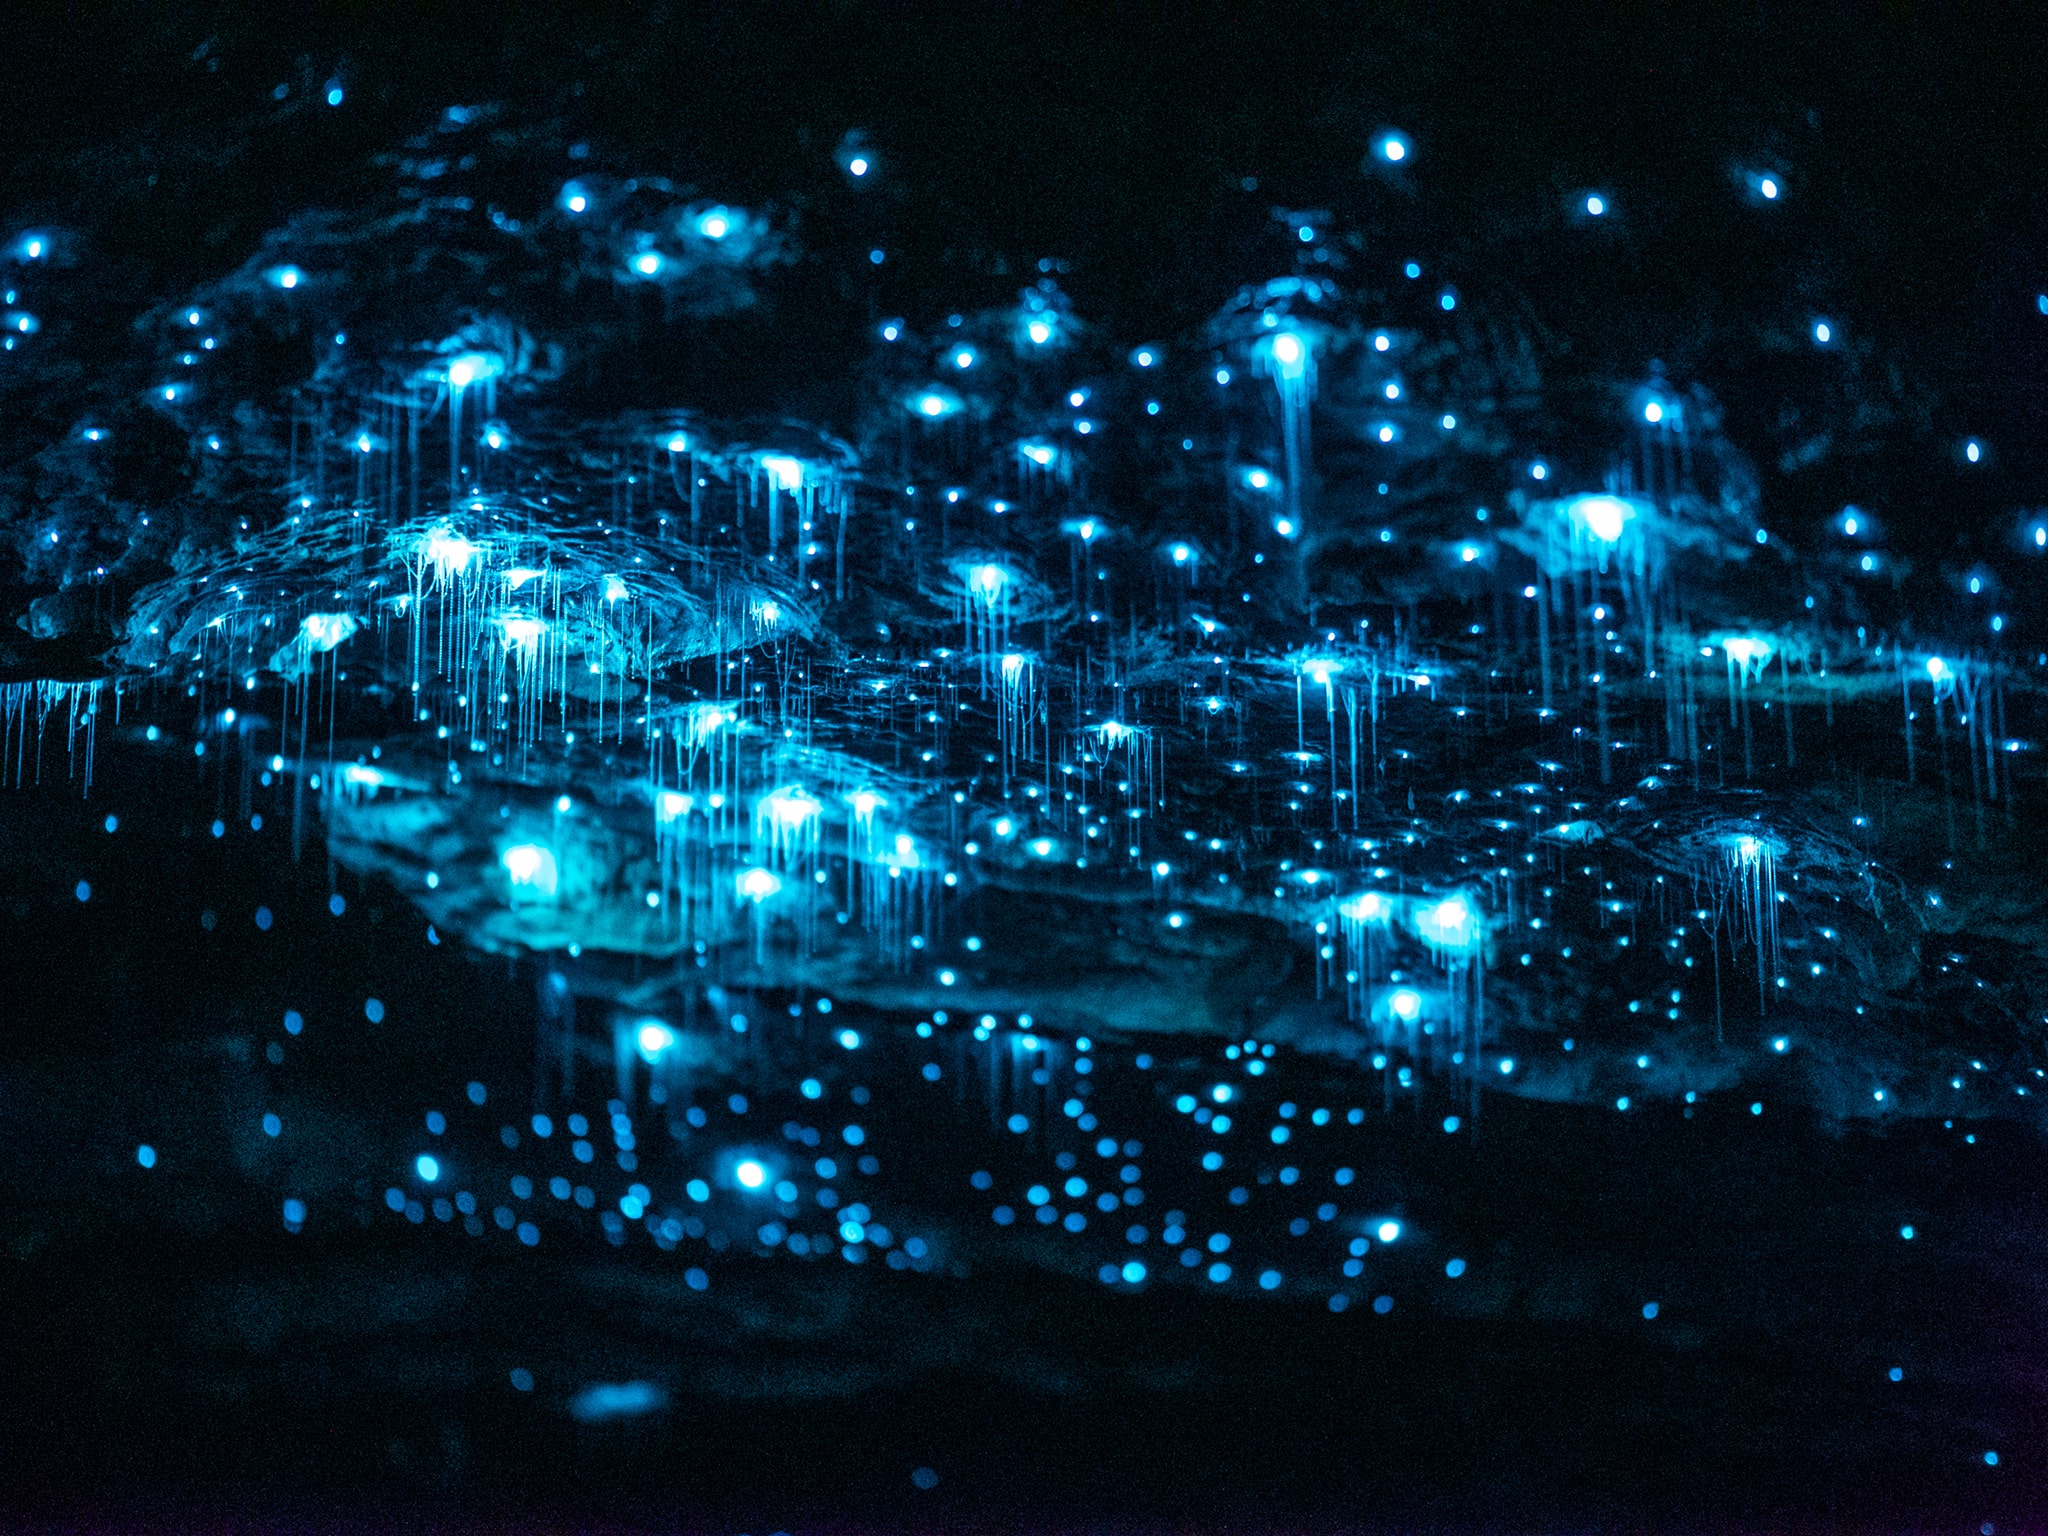 A close up look at some blue glowworms hanging from a dark cave